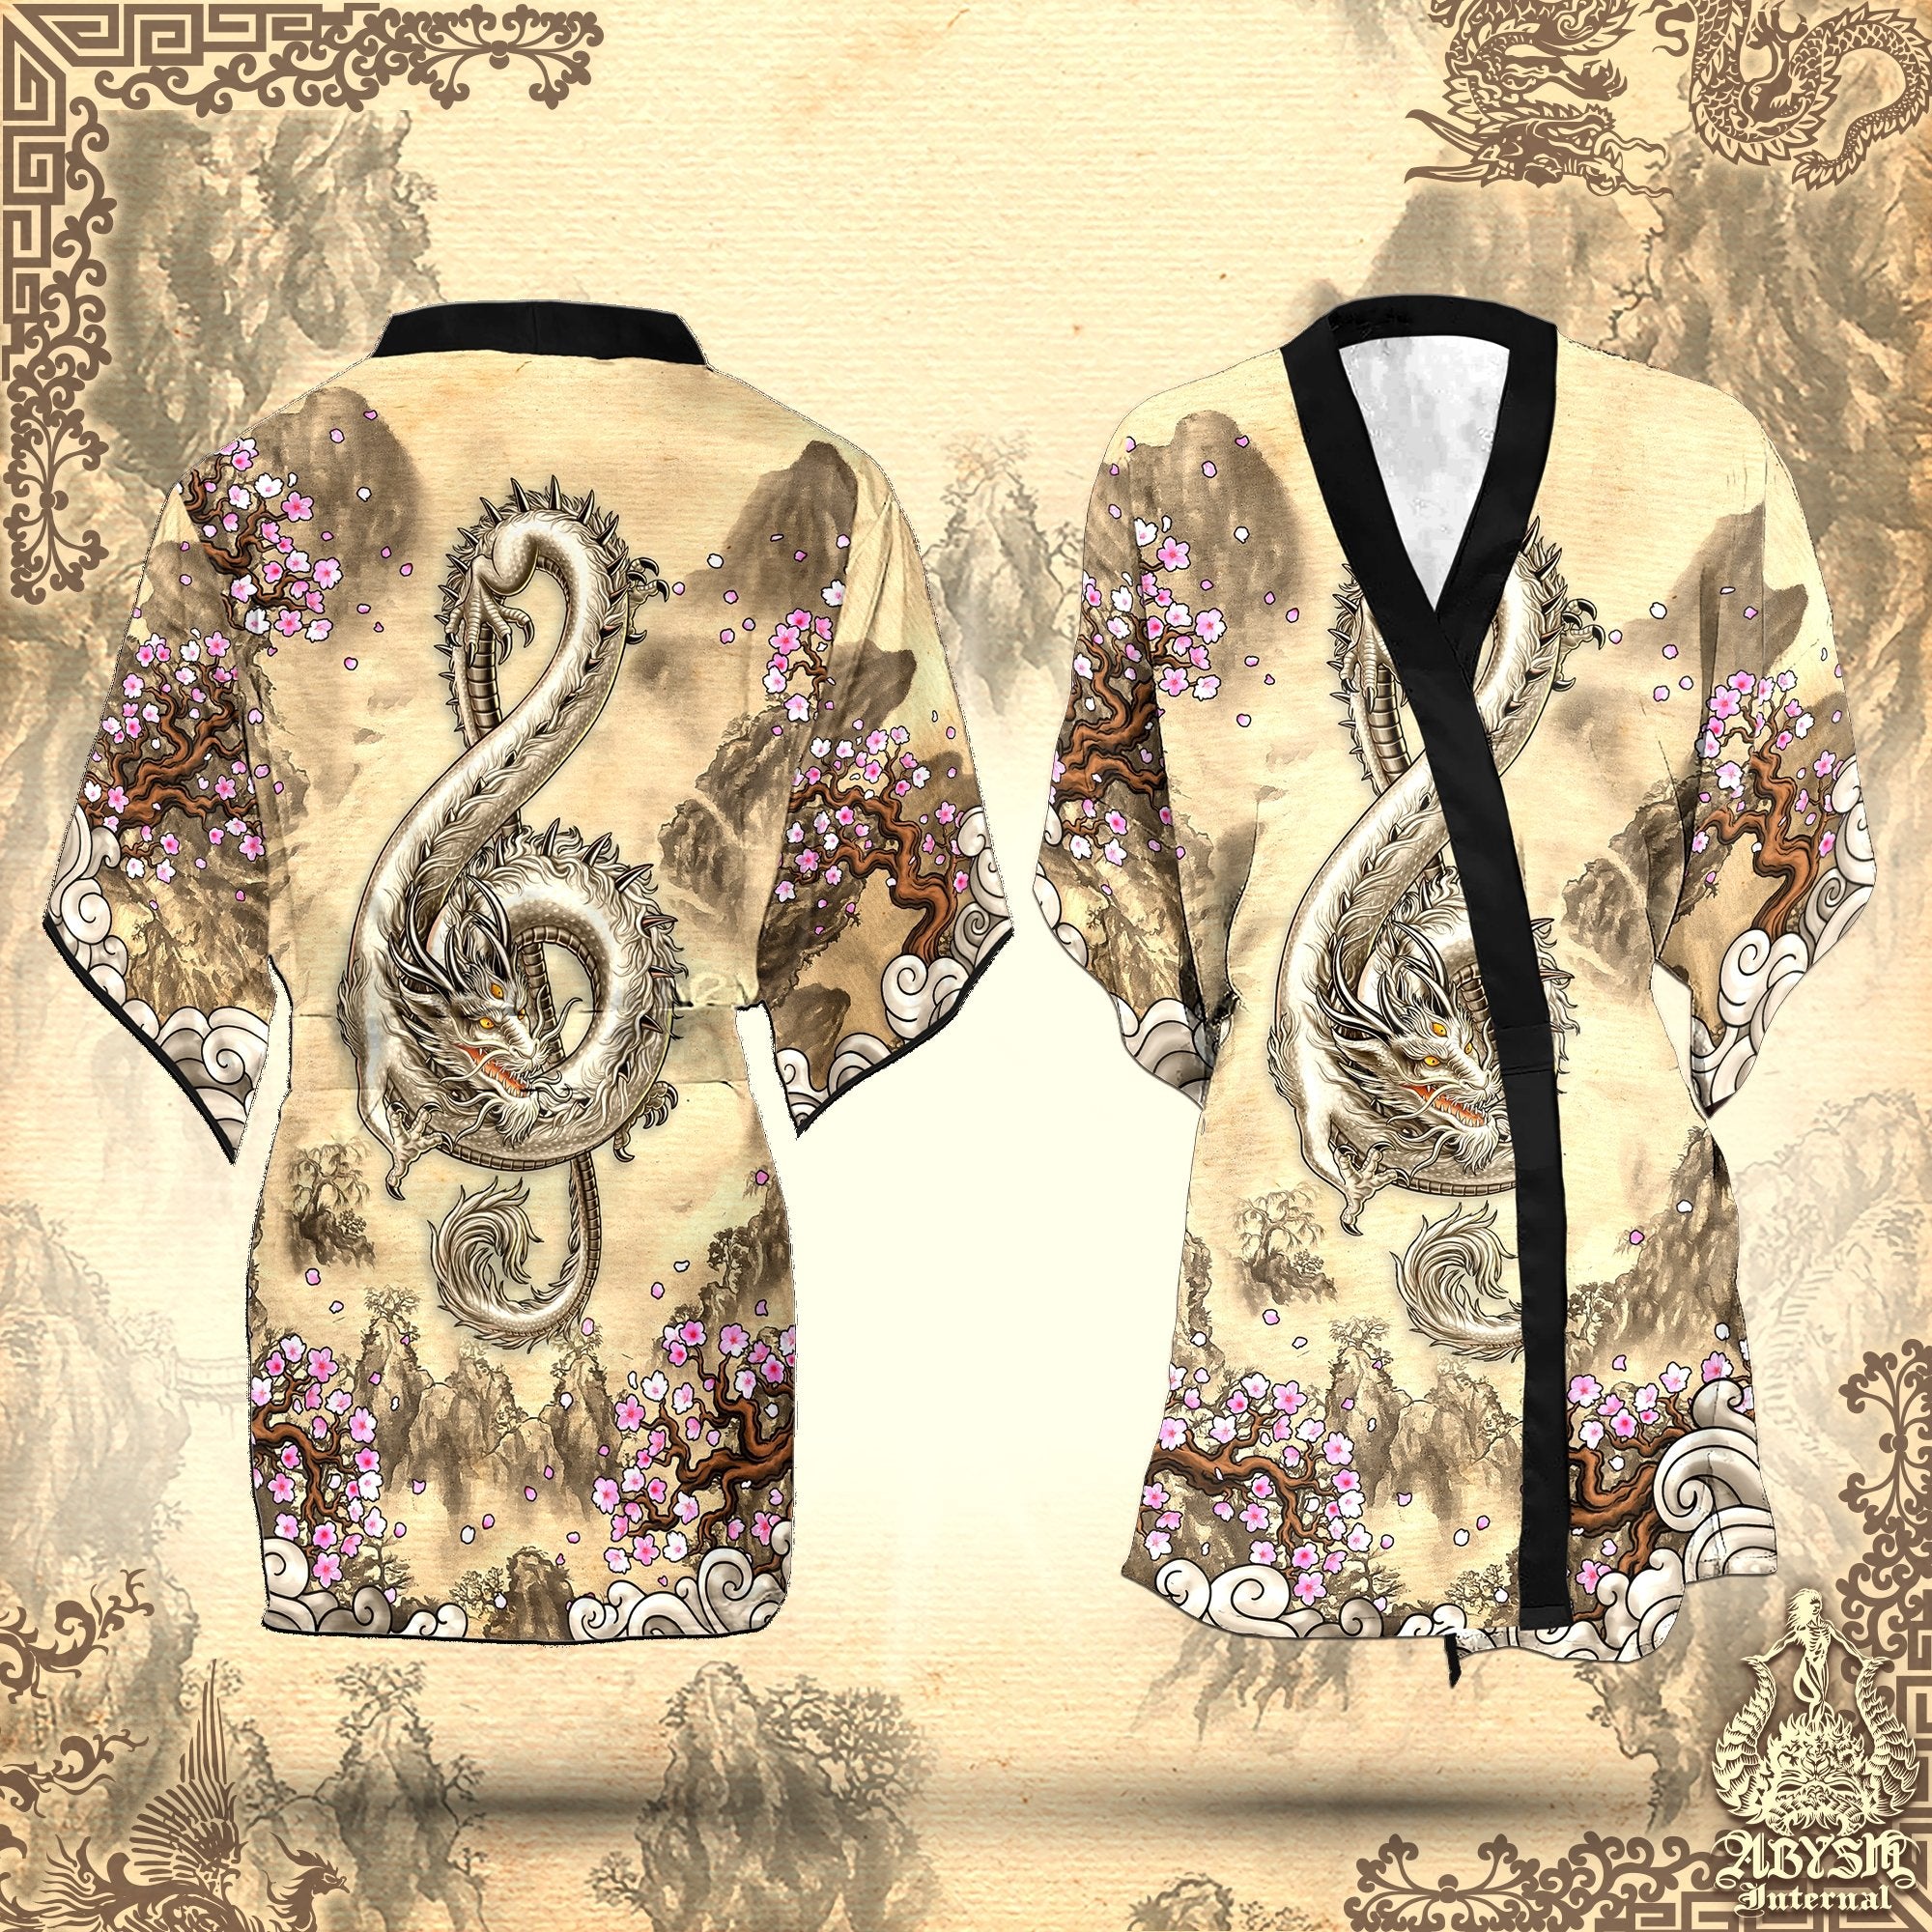 Music Cover Up, Beach Outfit, Party Kimono, Summer Festival Robe, Indie and Alternative Clothing, Unisex - Dragon, Chinese Painting - Abysm Internal